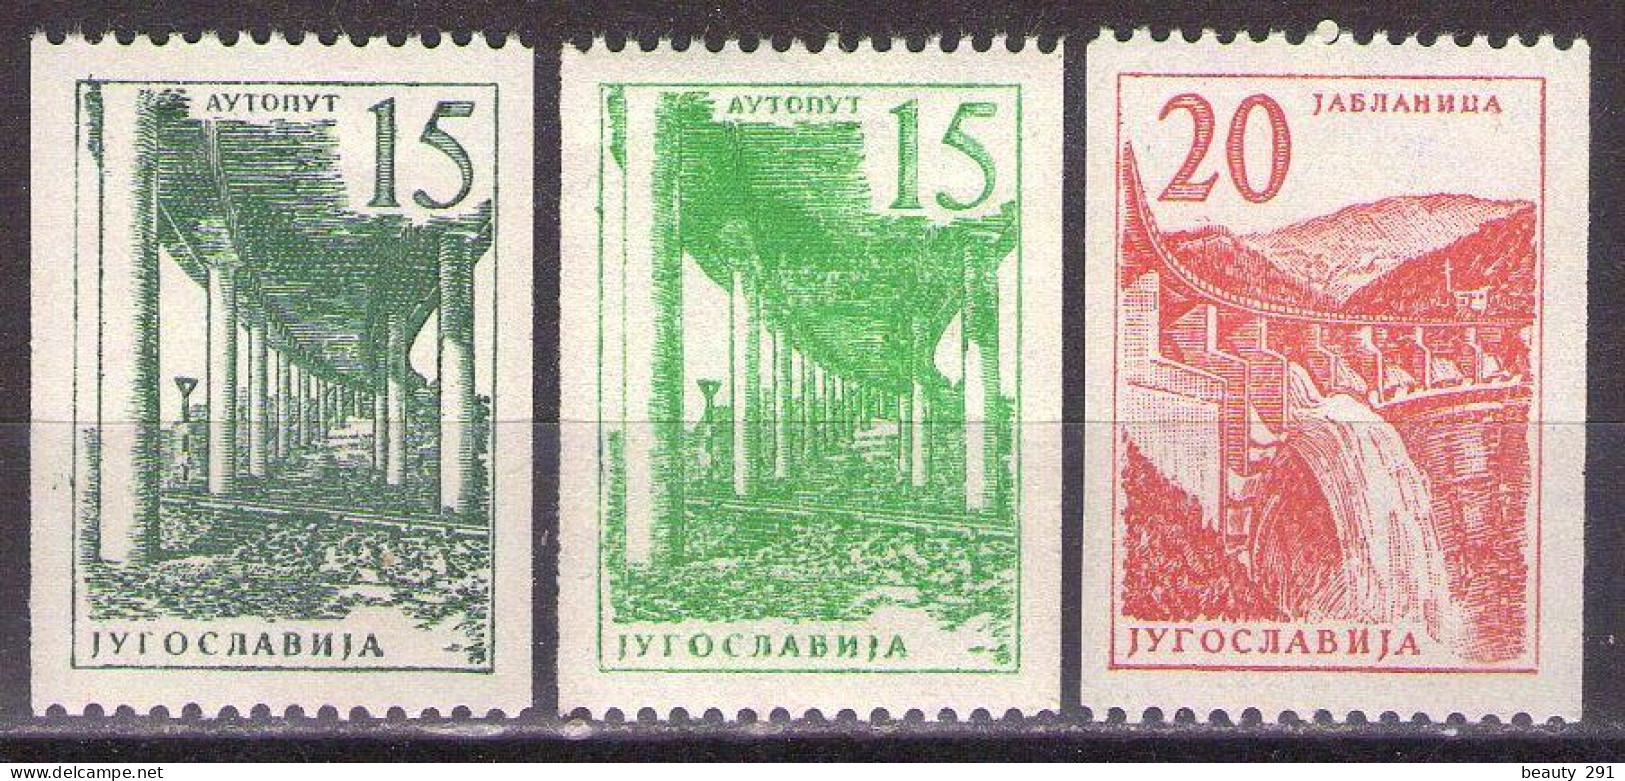 Yugoslavia 1959 - Industry And Architecture Coil Stamps - Mi 898-899a,b - MNH**VF - Nuevos